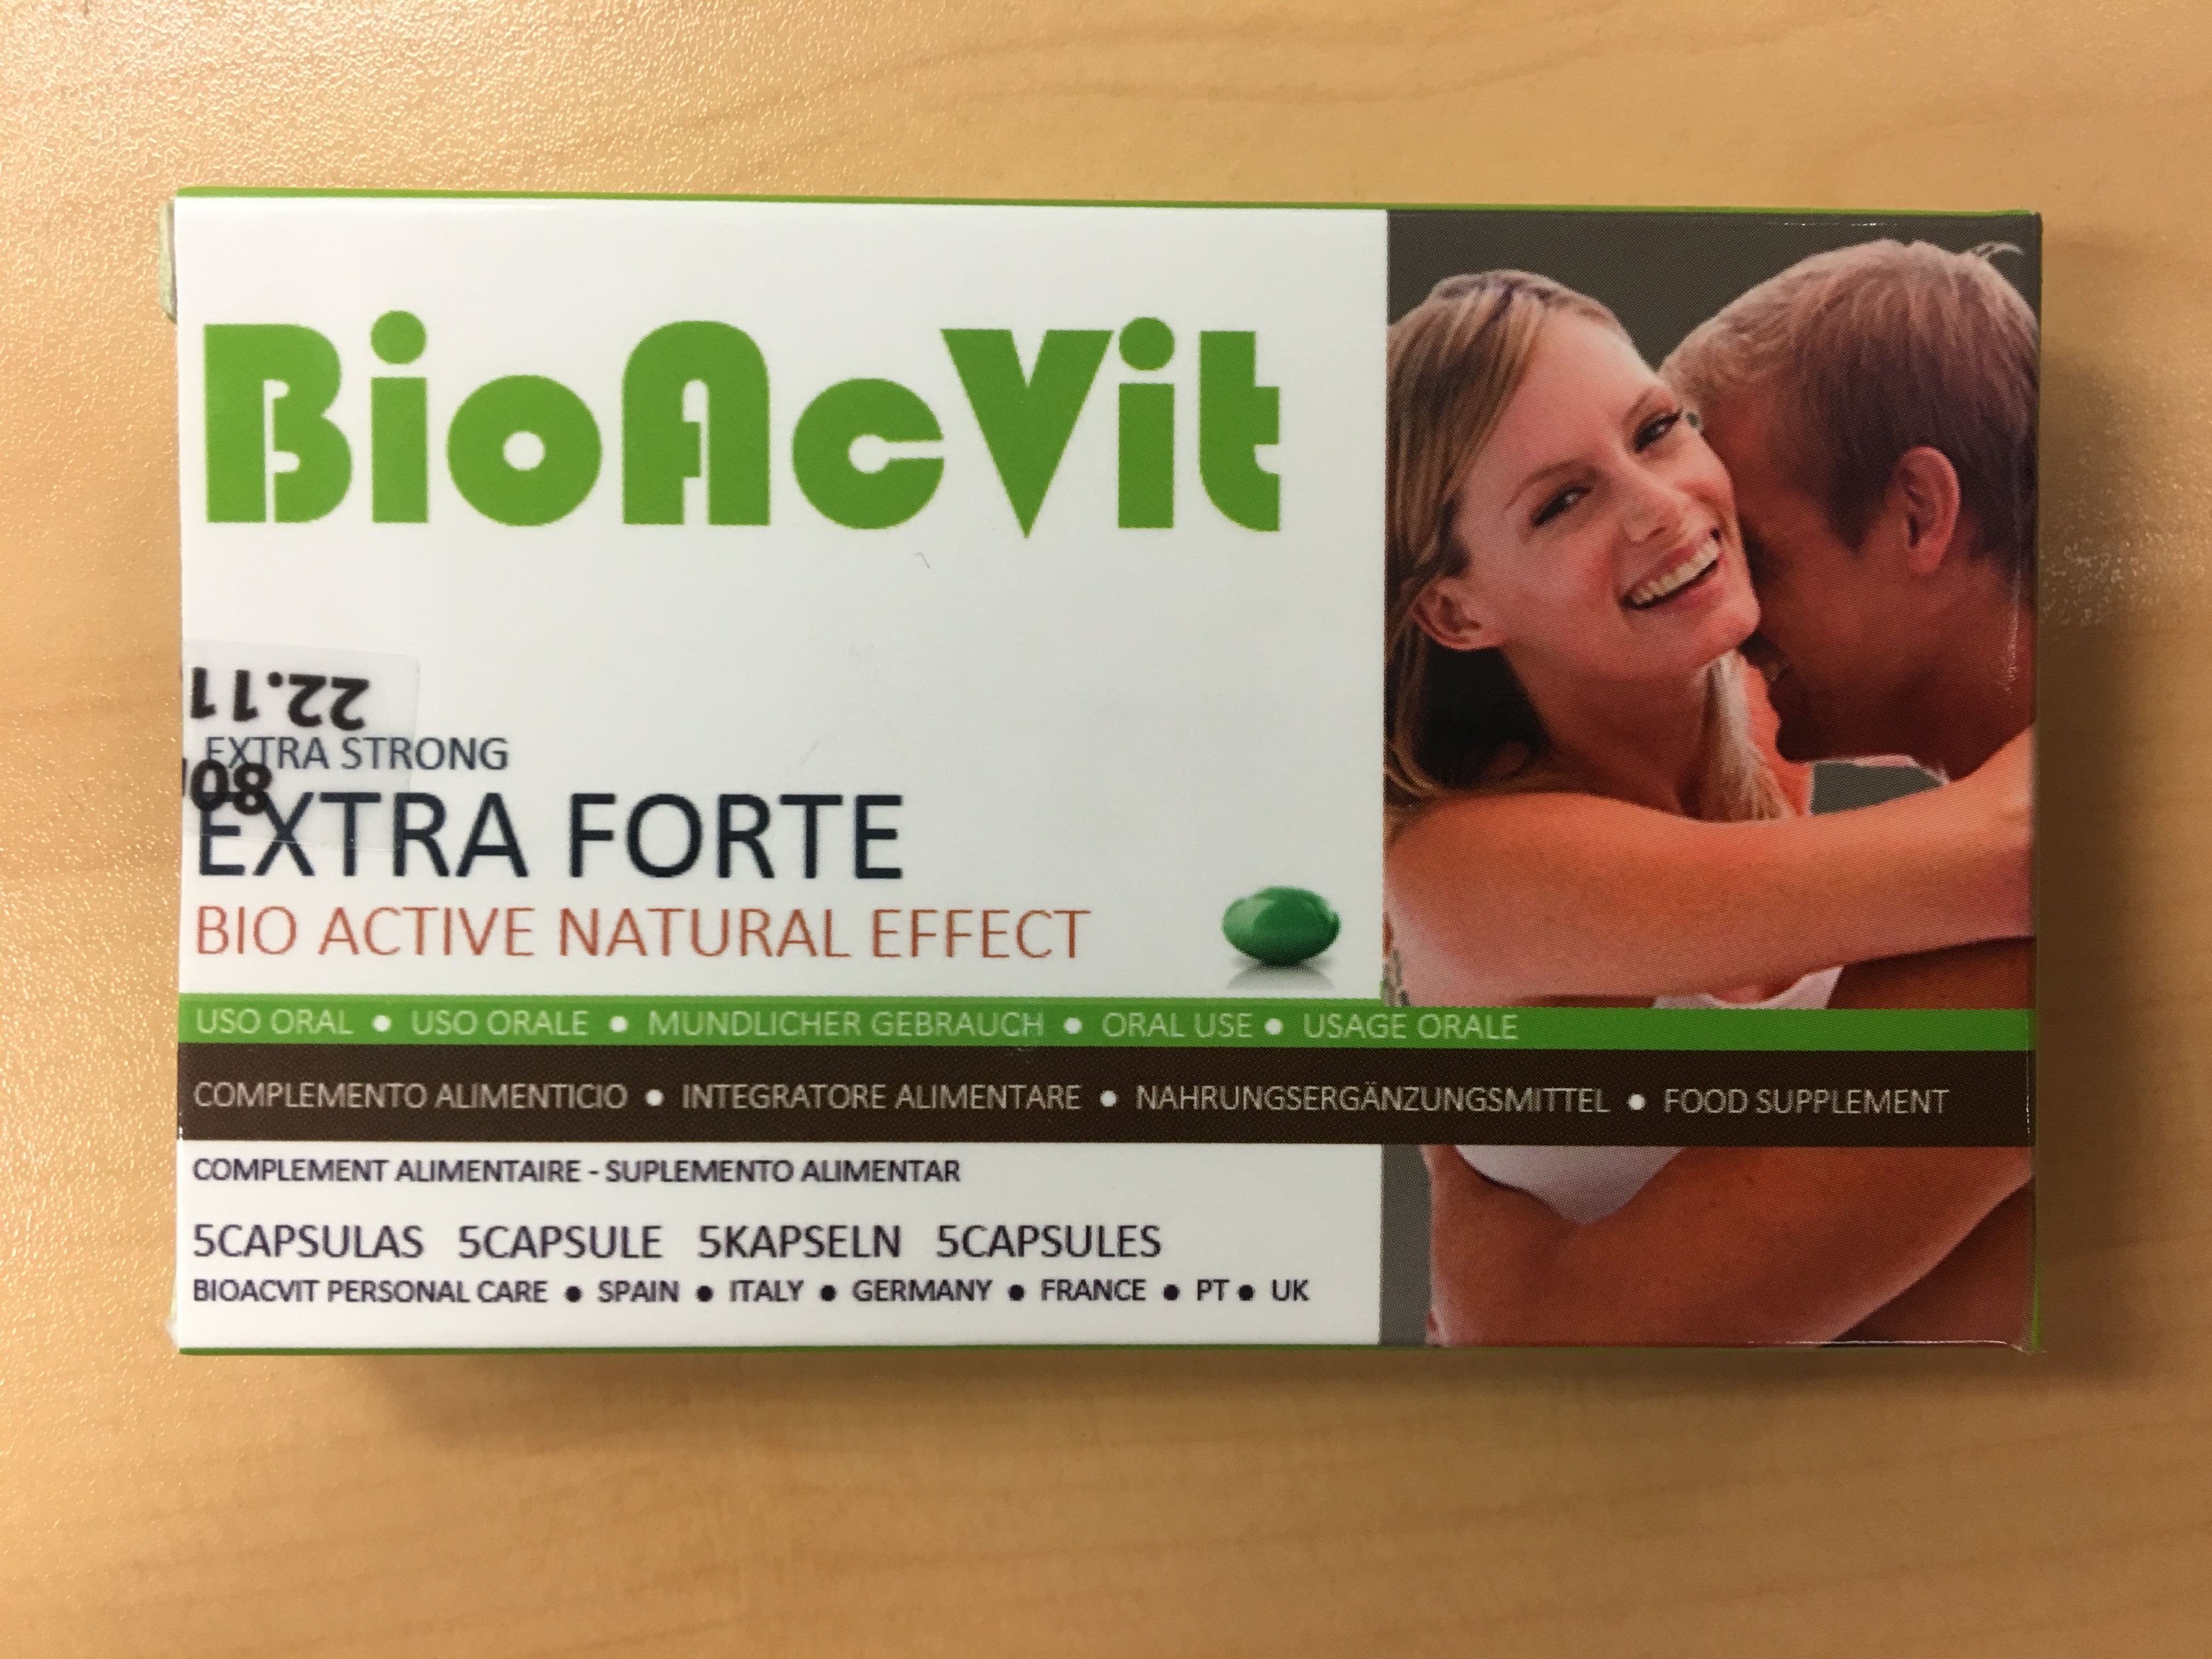 Image of the illigal product: BioAcVit Extra Forte